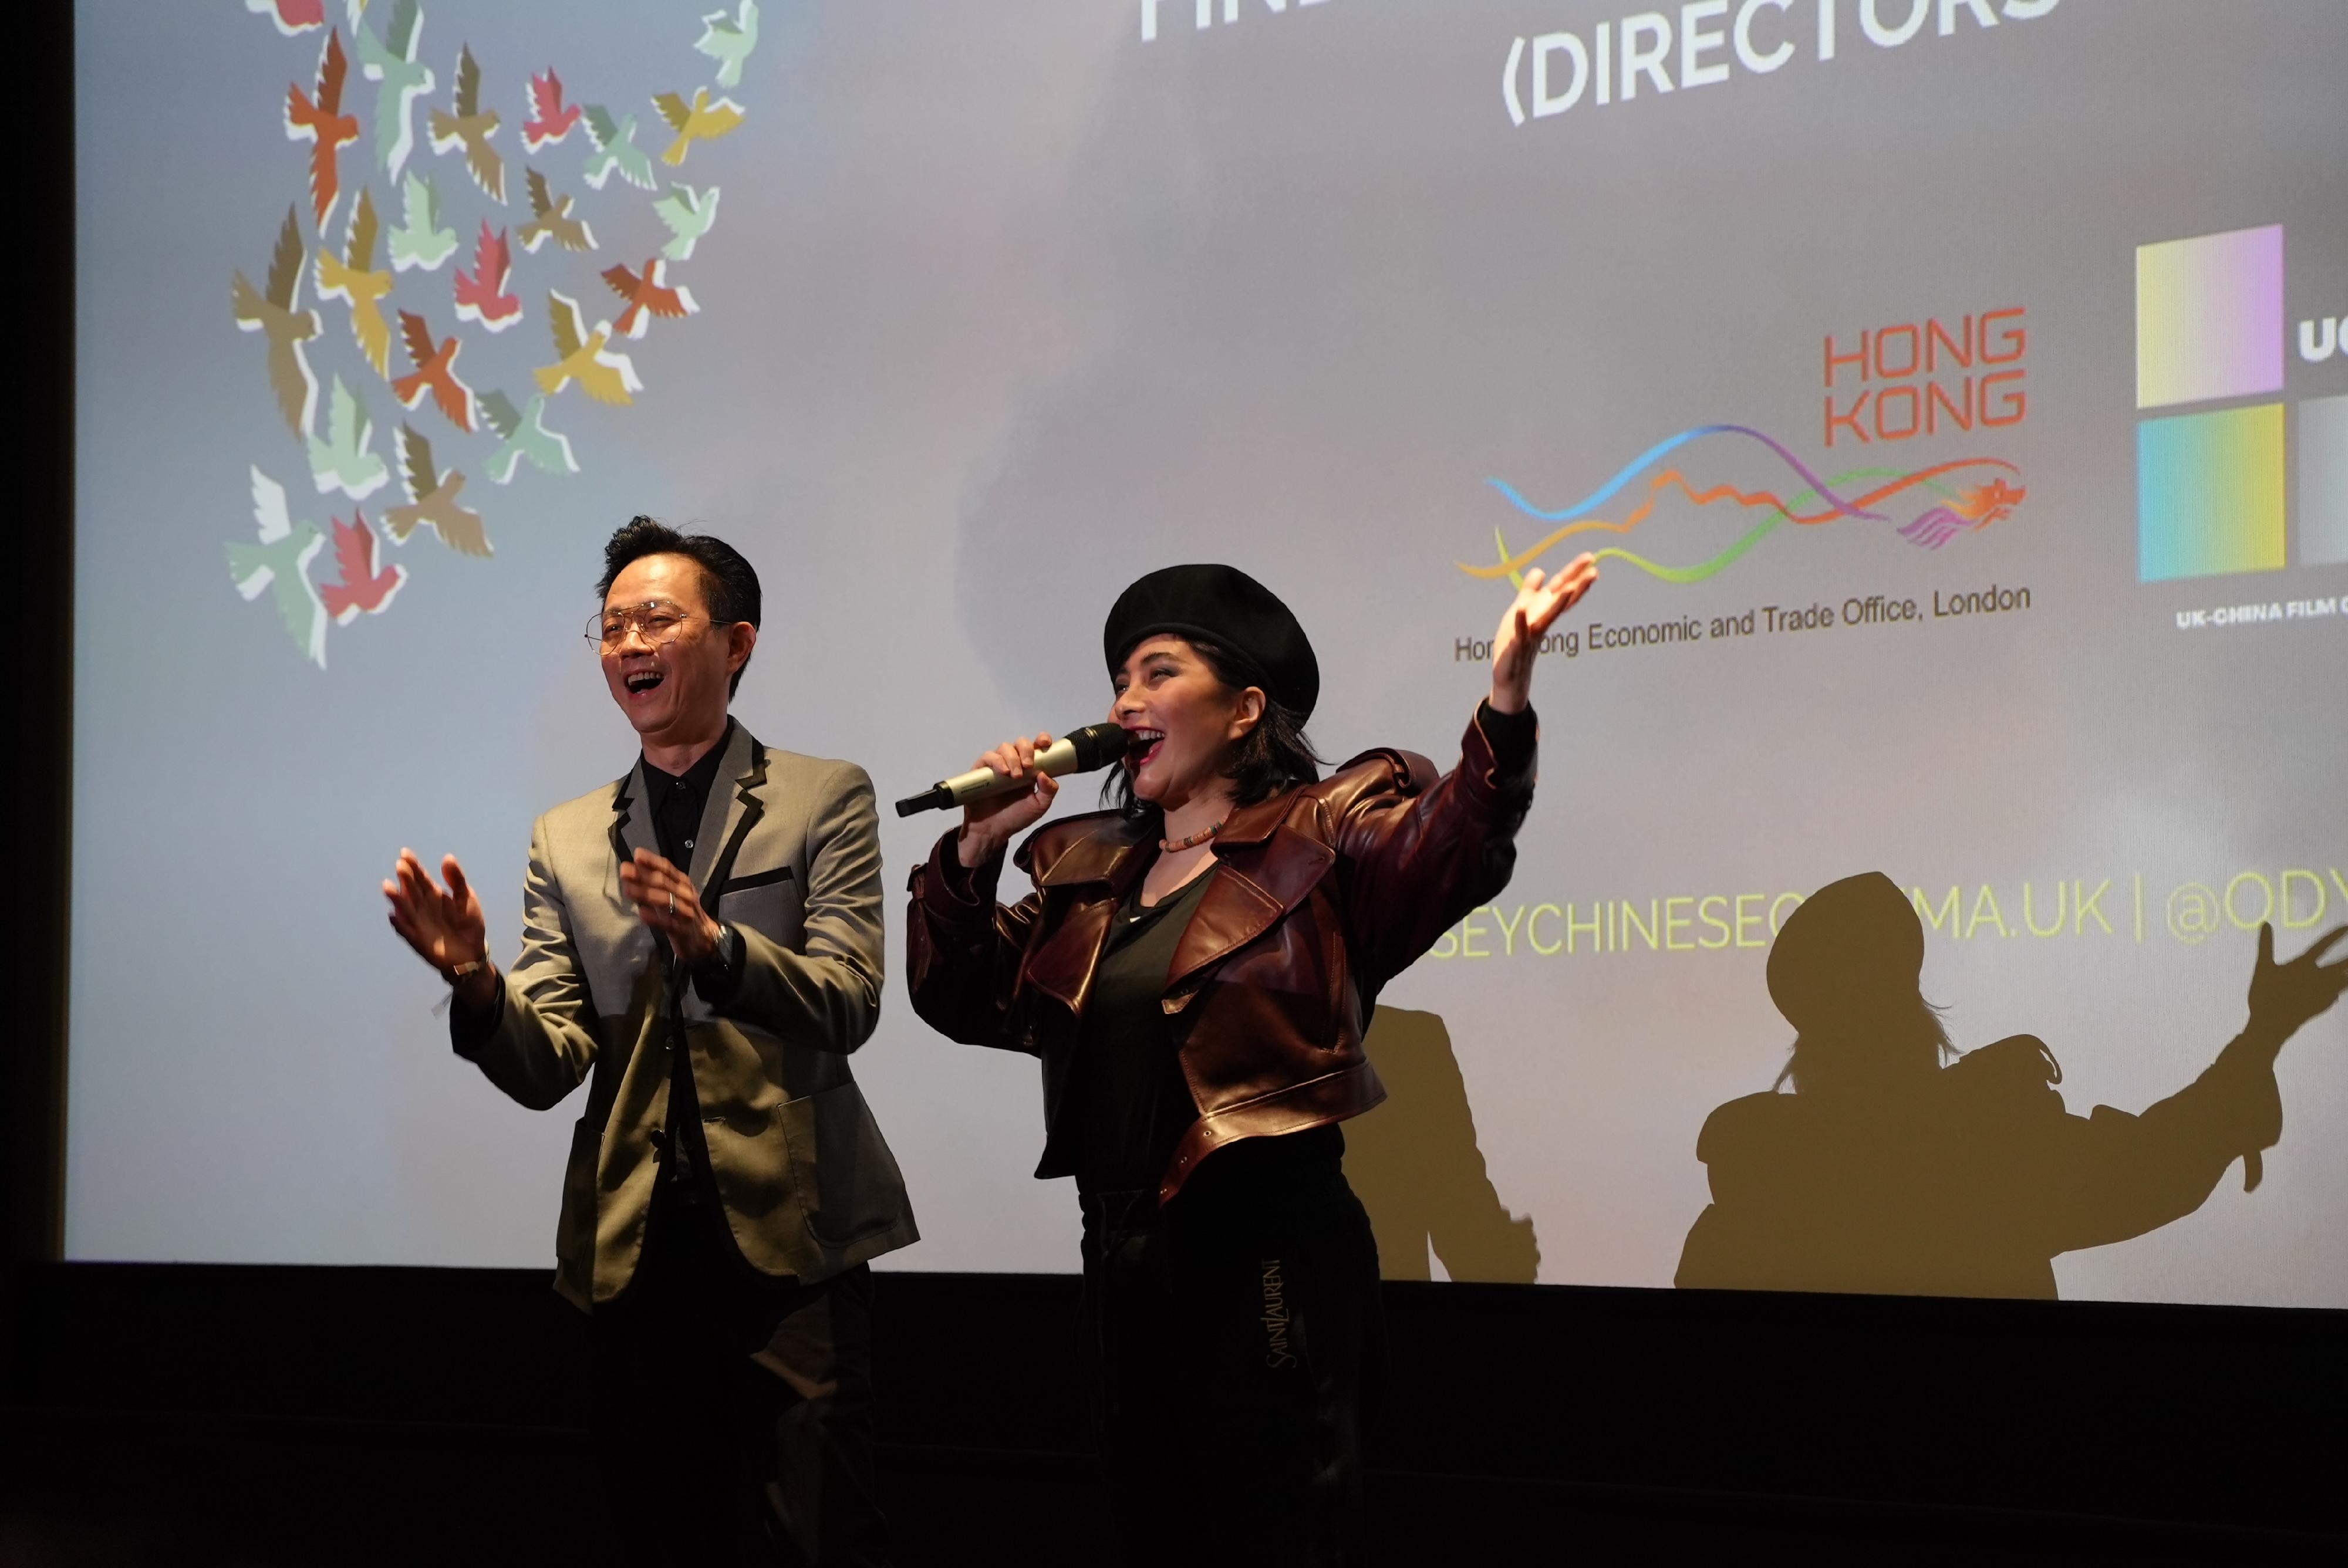 The Hong Kong Economic and Trade Office, London and Create Hong Kong supported the opening screening and reception of Odyssey 2023 film festival held at the Battersea Power Station, London on May 26 (London time).   Photo shows the leading actress and Director of "Finding Bliss: Fire and Ice - The Director's Cut" Josie Ho and Kim Chan welcoming audience of the opening screening. 